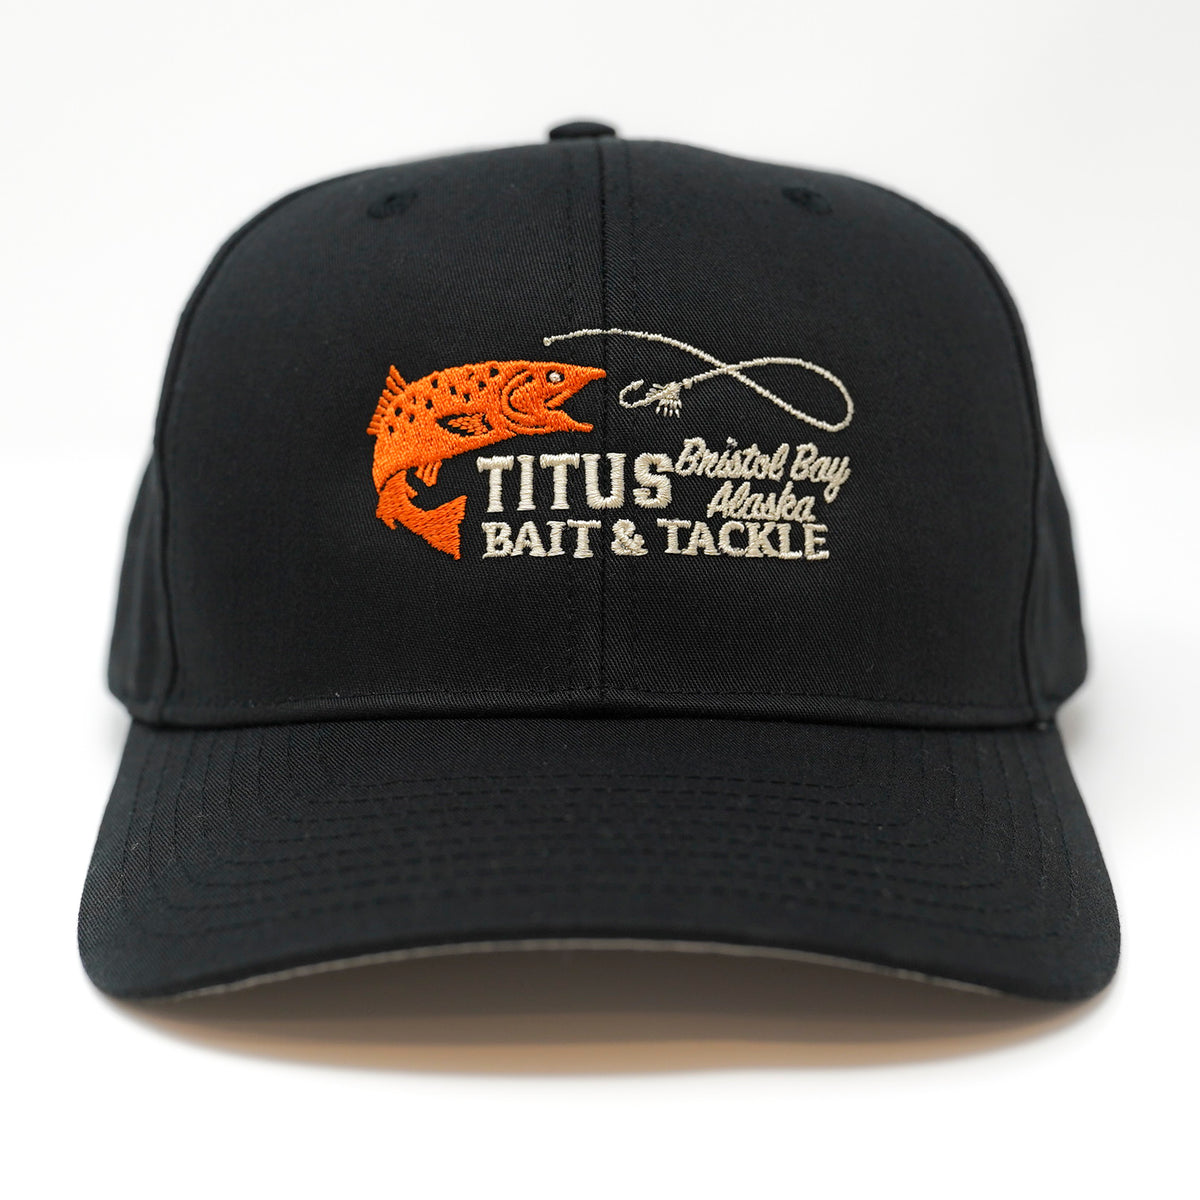 Titus Bristol Bay Bait and Tackle - Trucker Styler Pro Twill Hat